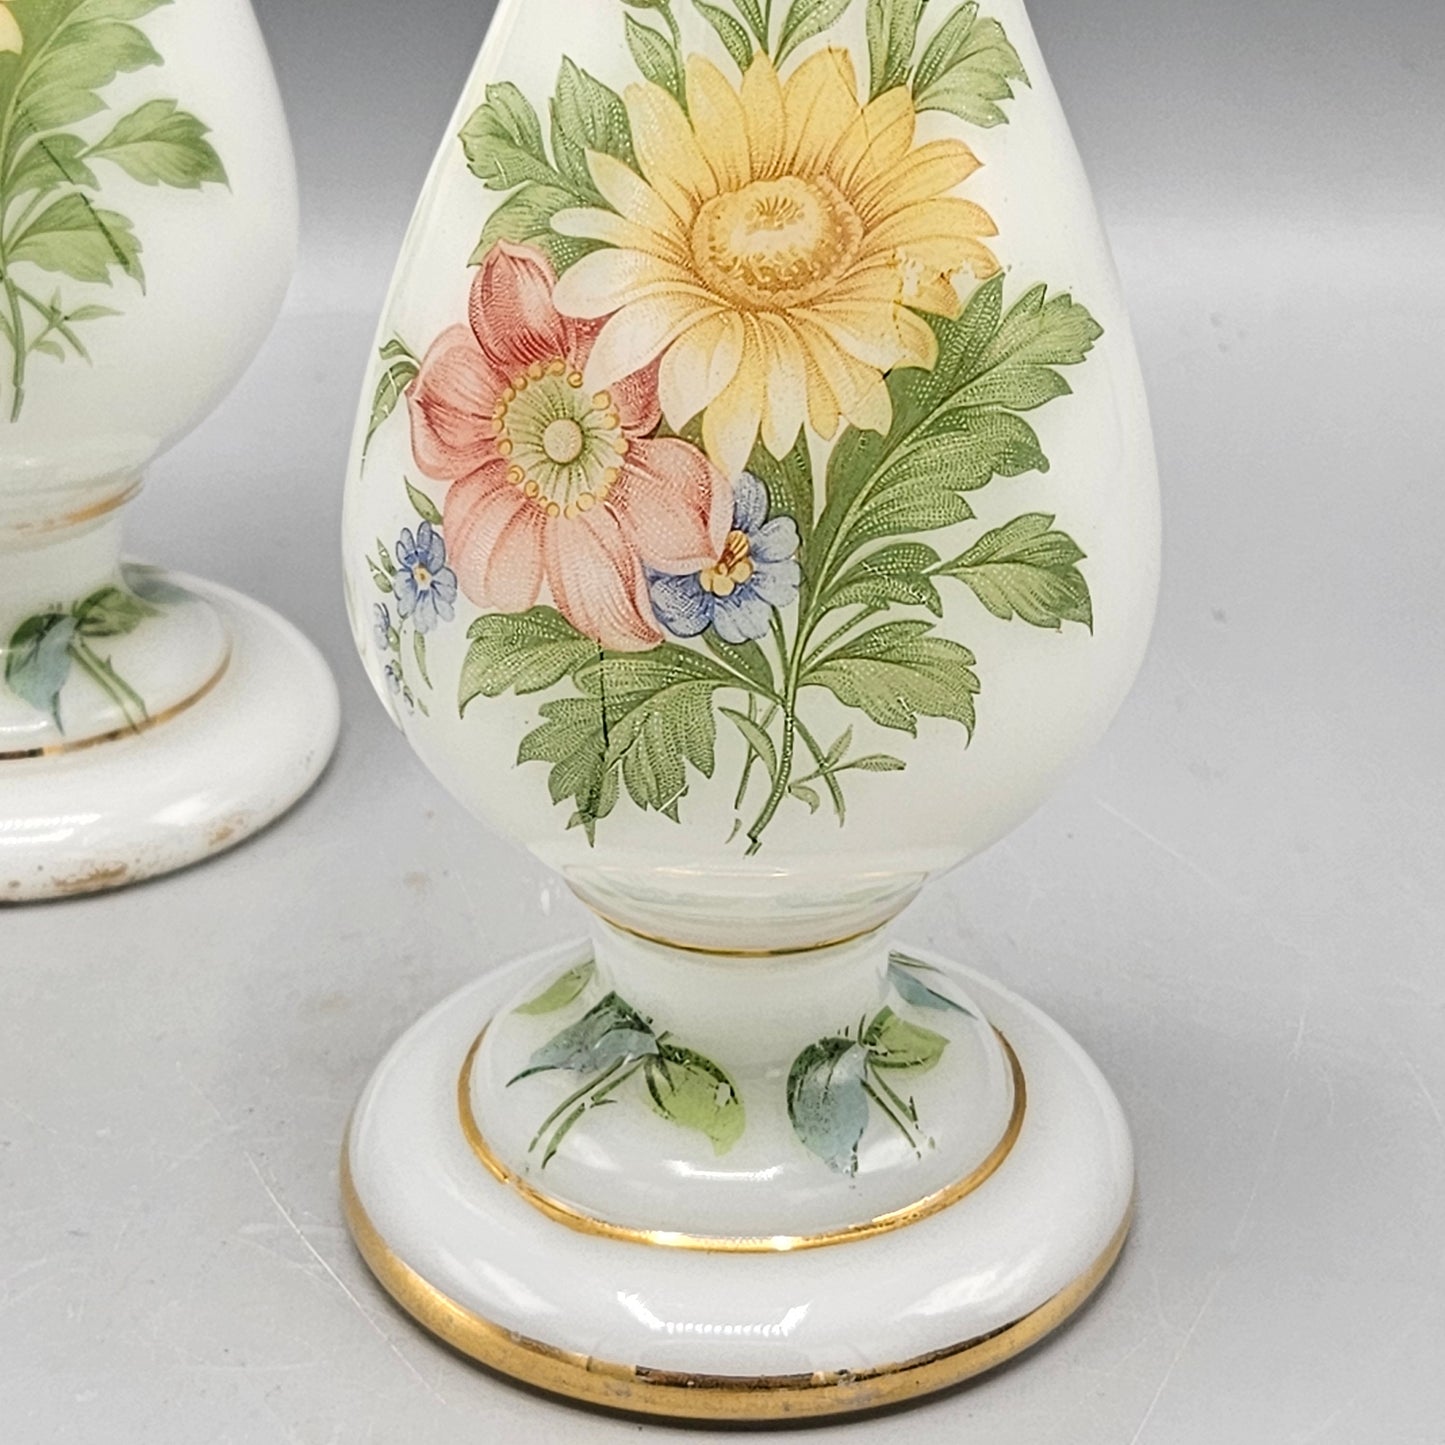 Pair of Vintage Milk Glass Vases with Flower Decoration